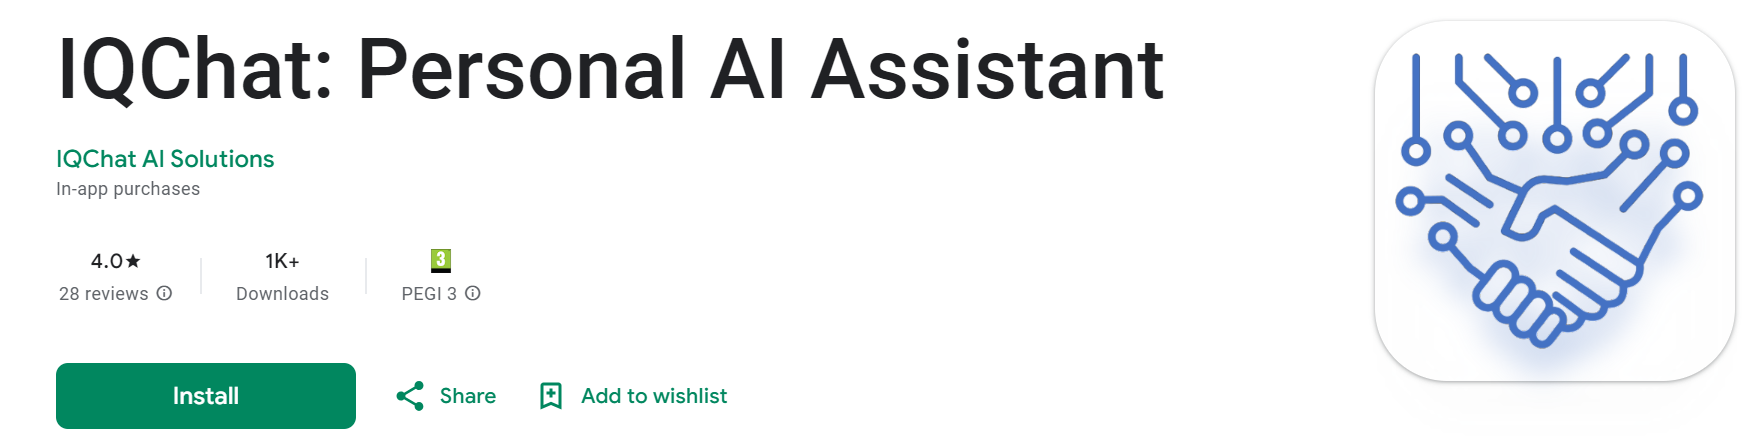 Your  AI Personal Assistant - IQChat